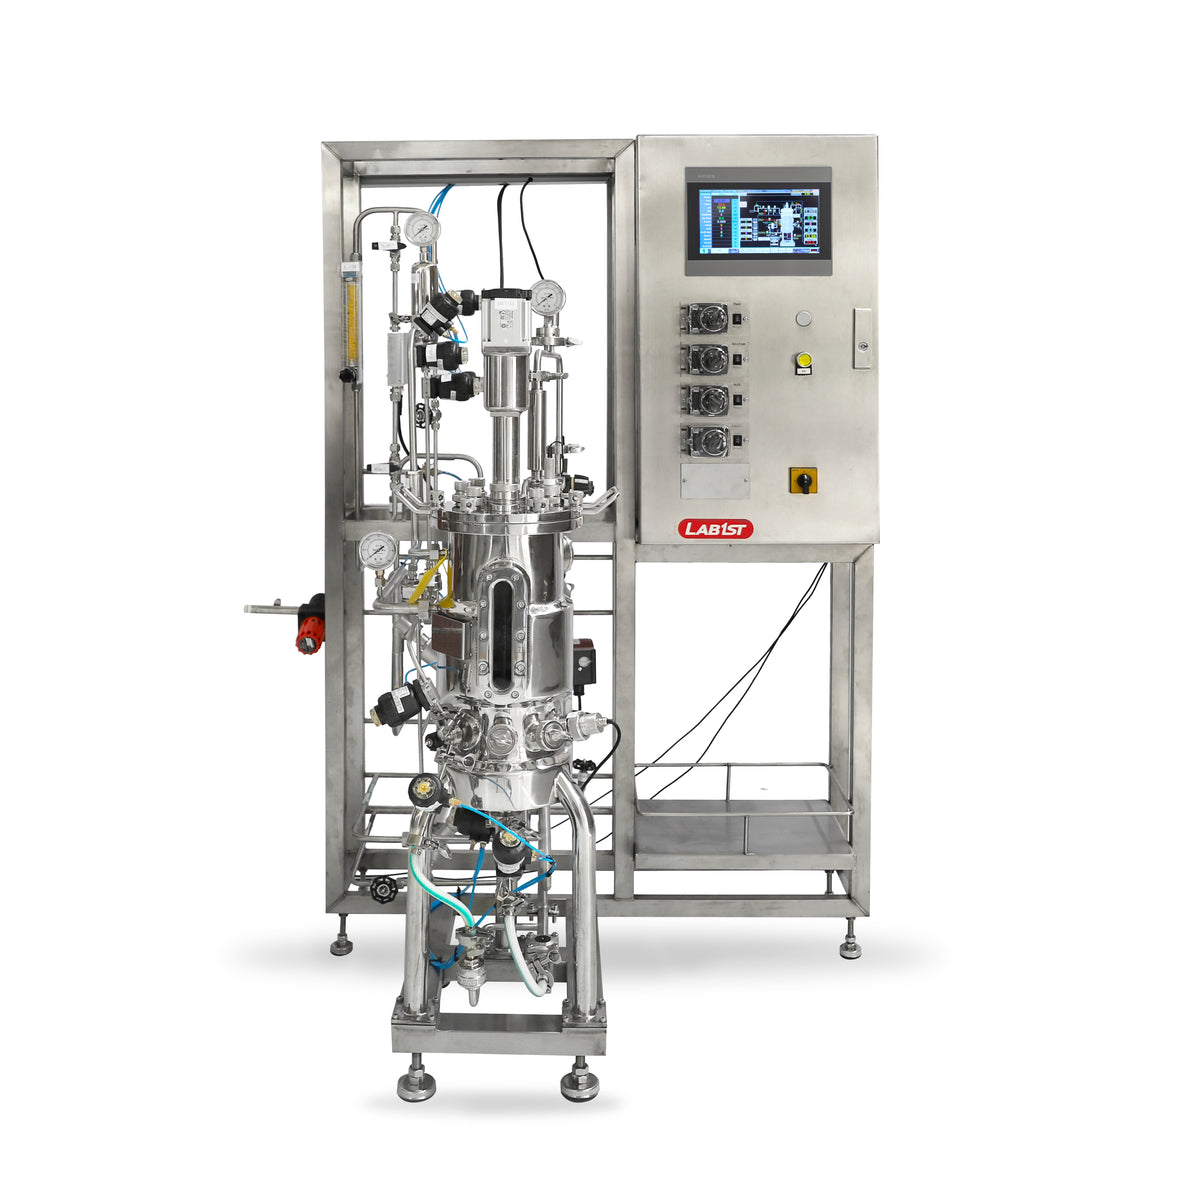 20L Stainless Steel Bioreactor for Microbial Fermentation with 2 Gas Inlets BR500-M1